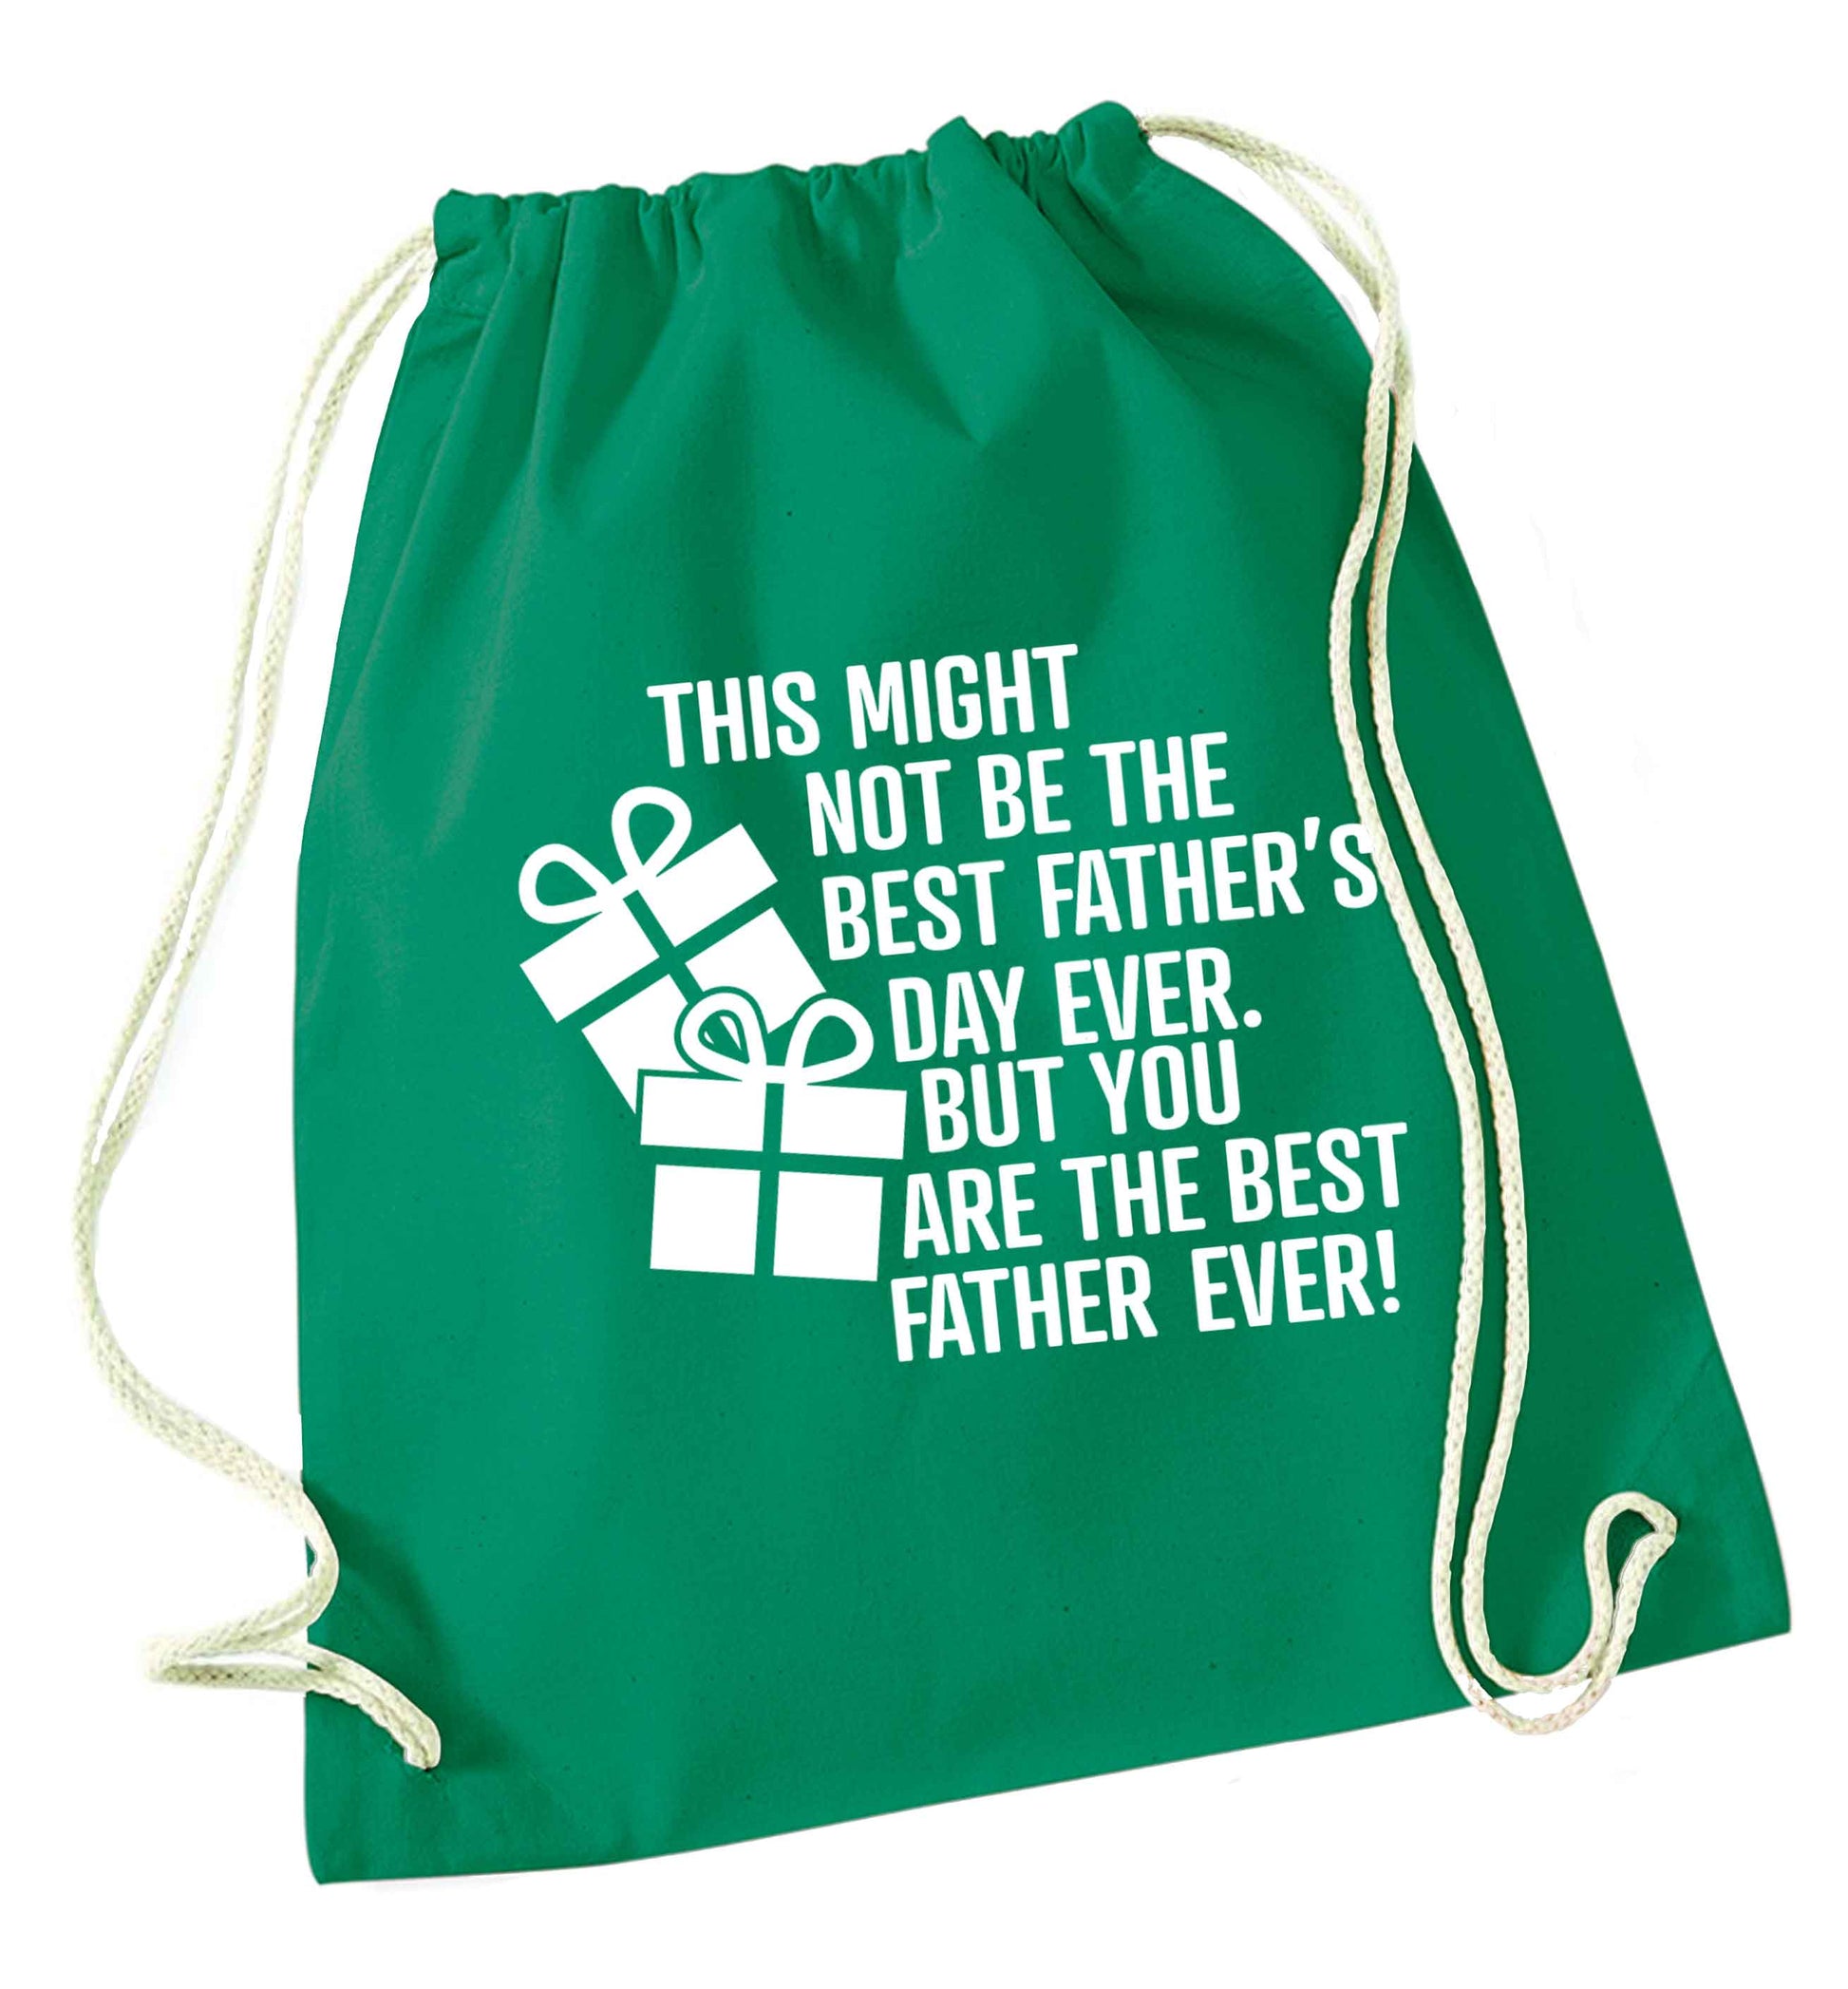 It might not be the best Father's Day ever but you are the best father ever! green drawstring bag